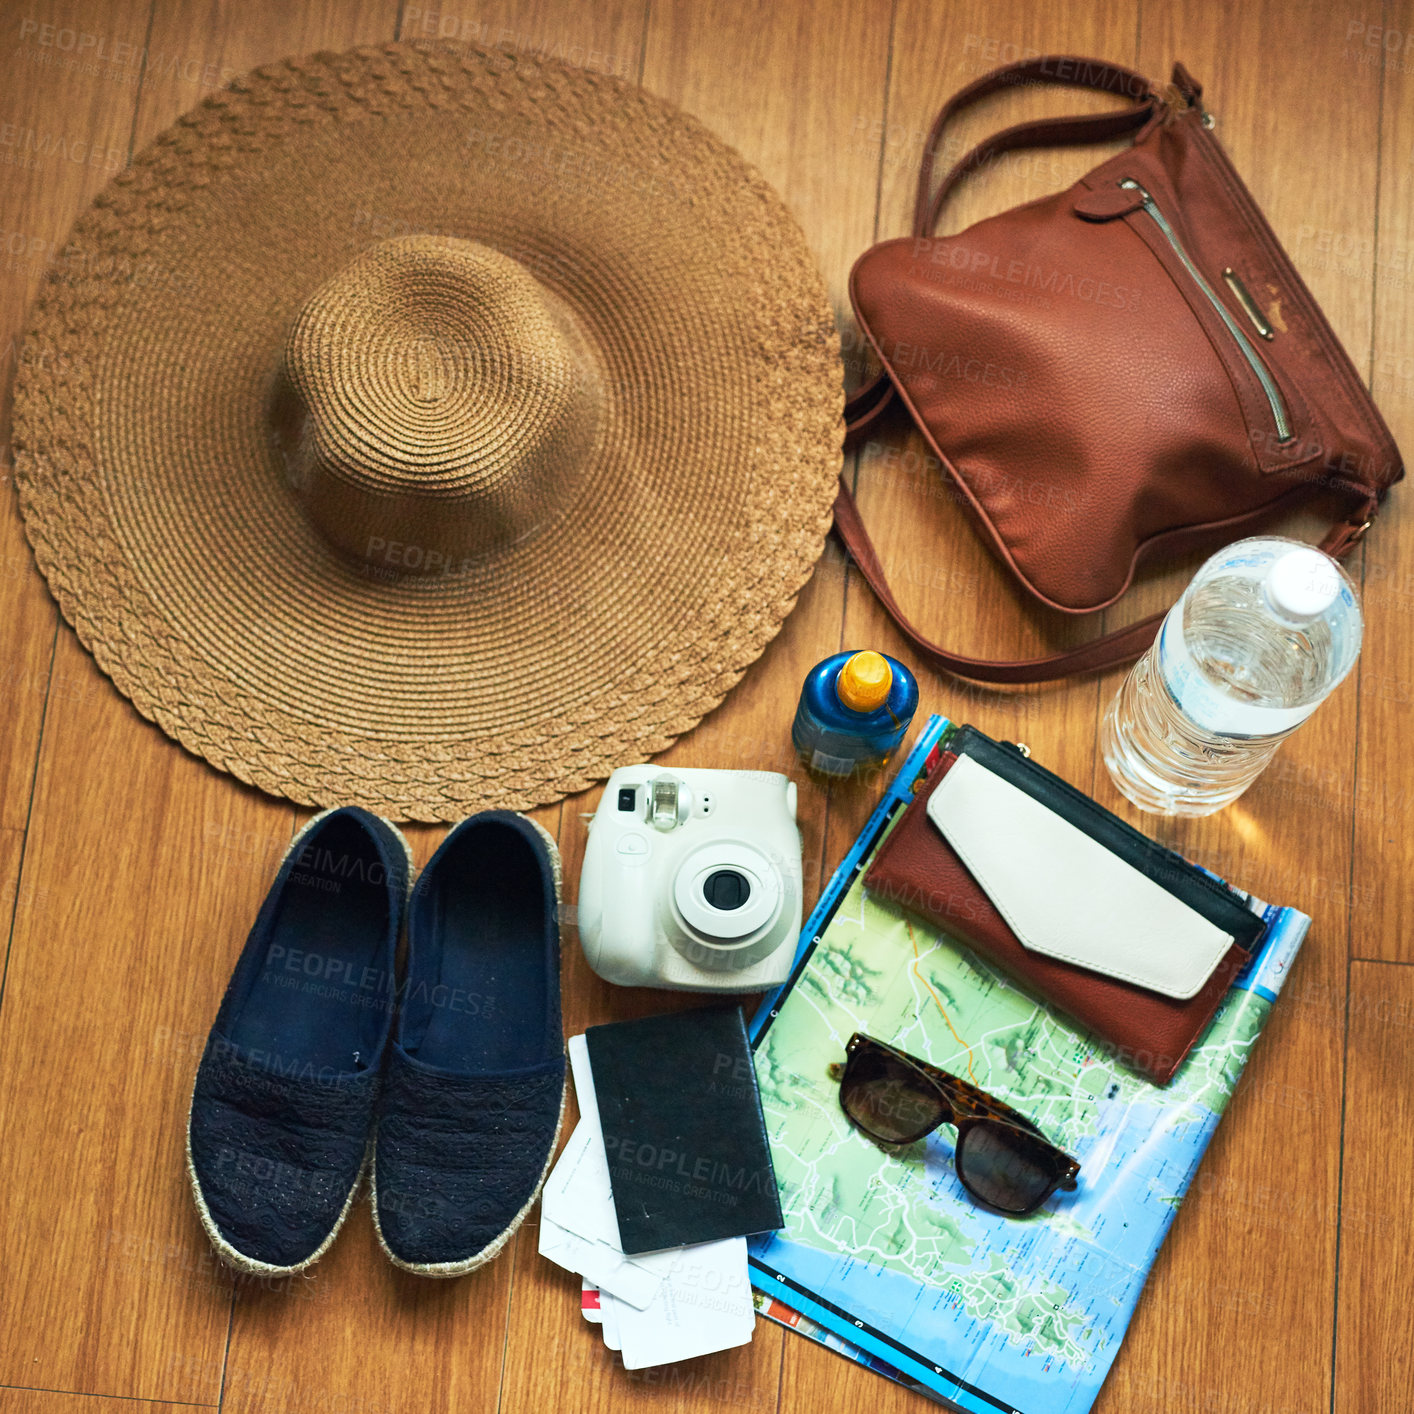 Buy stock photo High angle shot of travelling essentials on a table